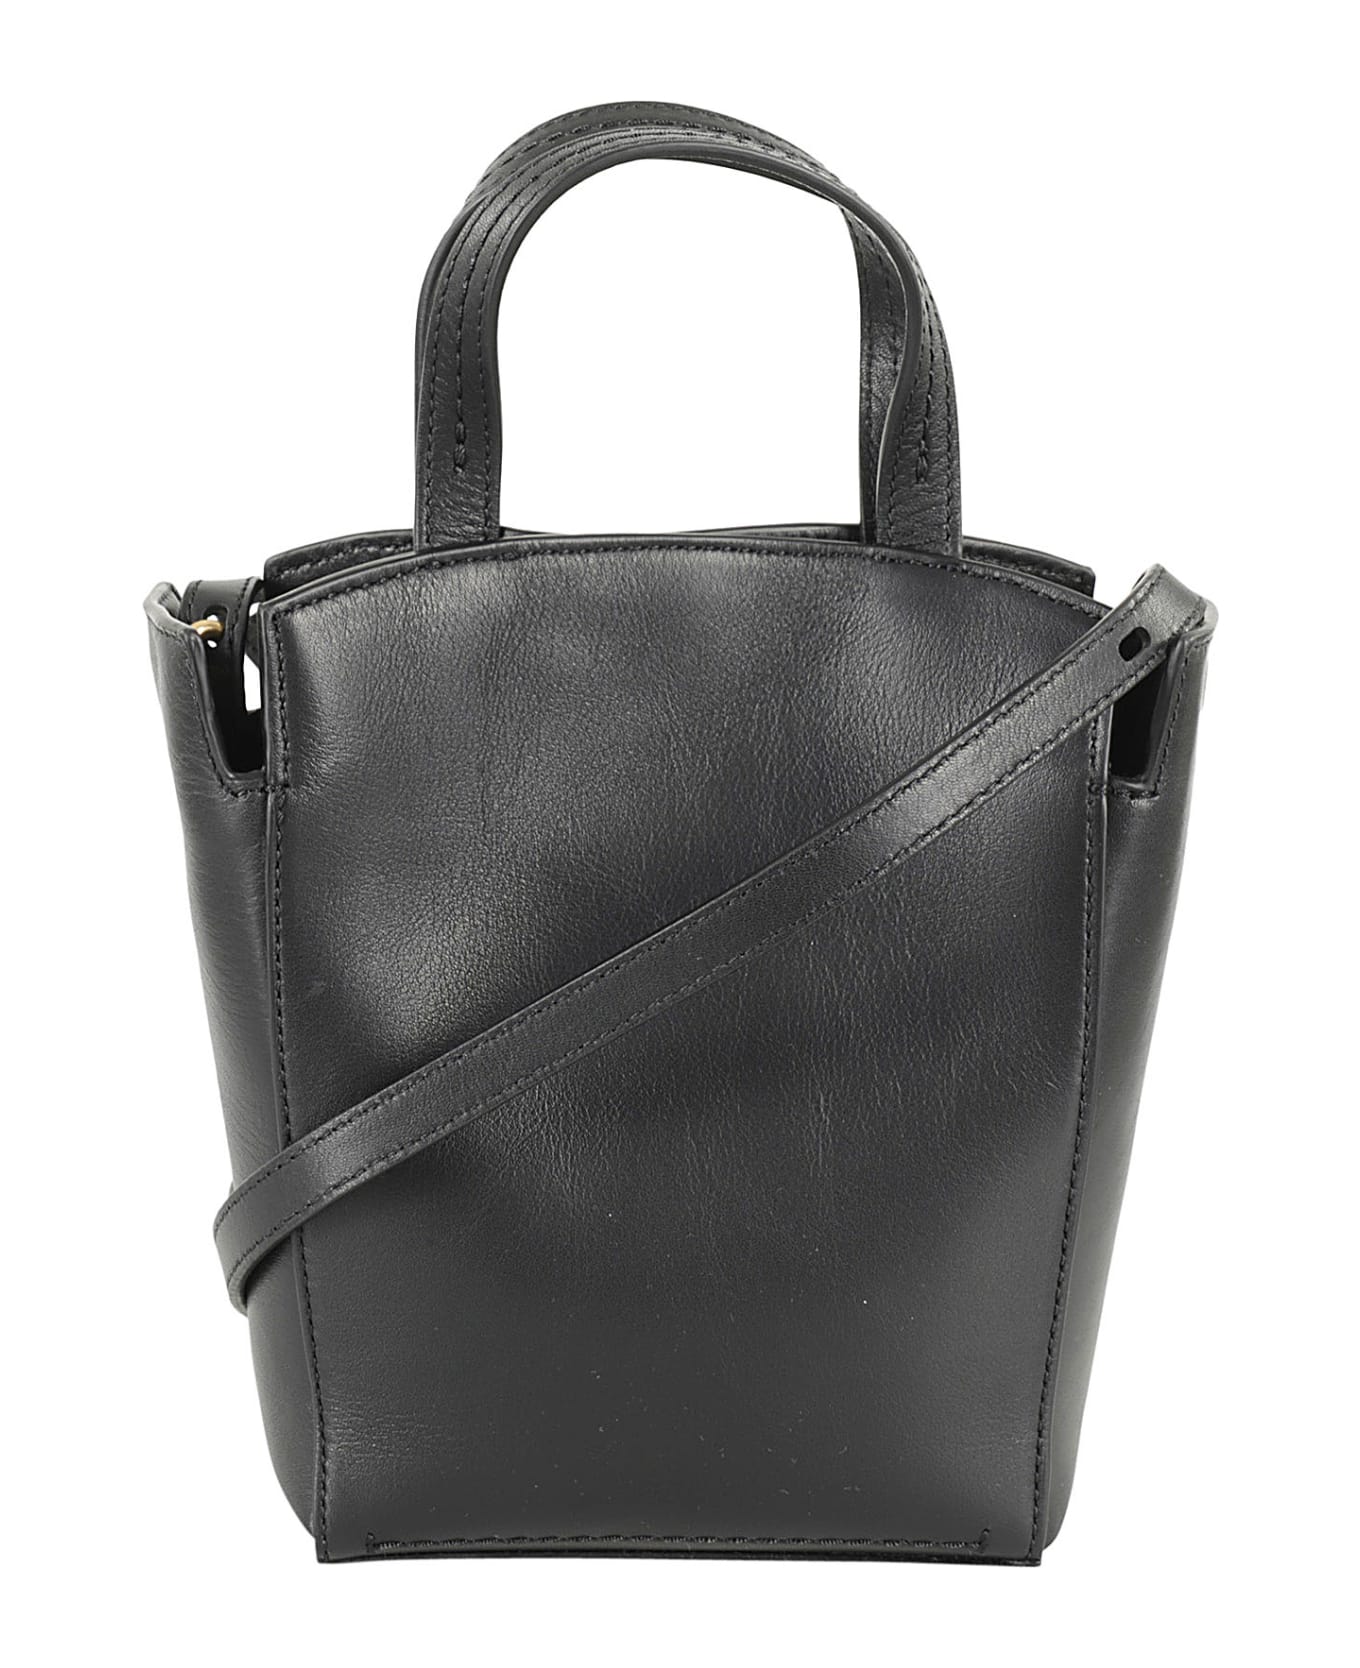 Mulberry Clovelly Mini Tote - Black トートバッグ